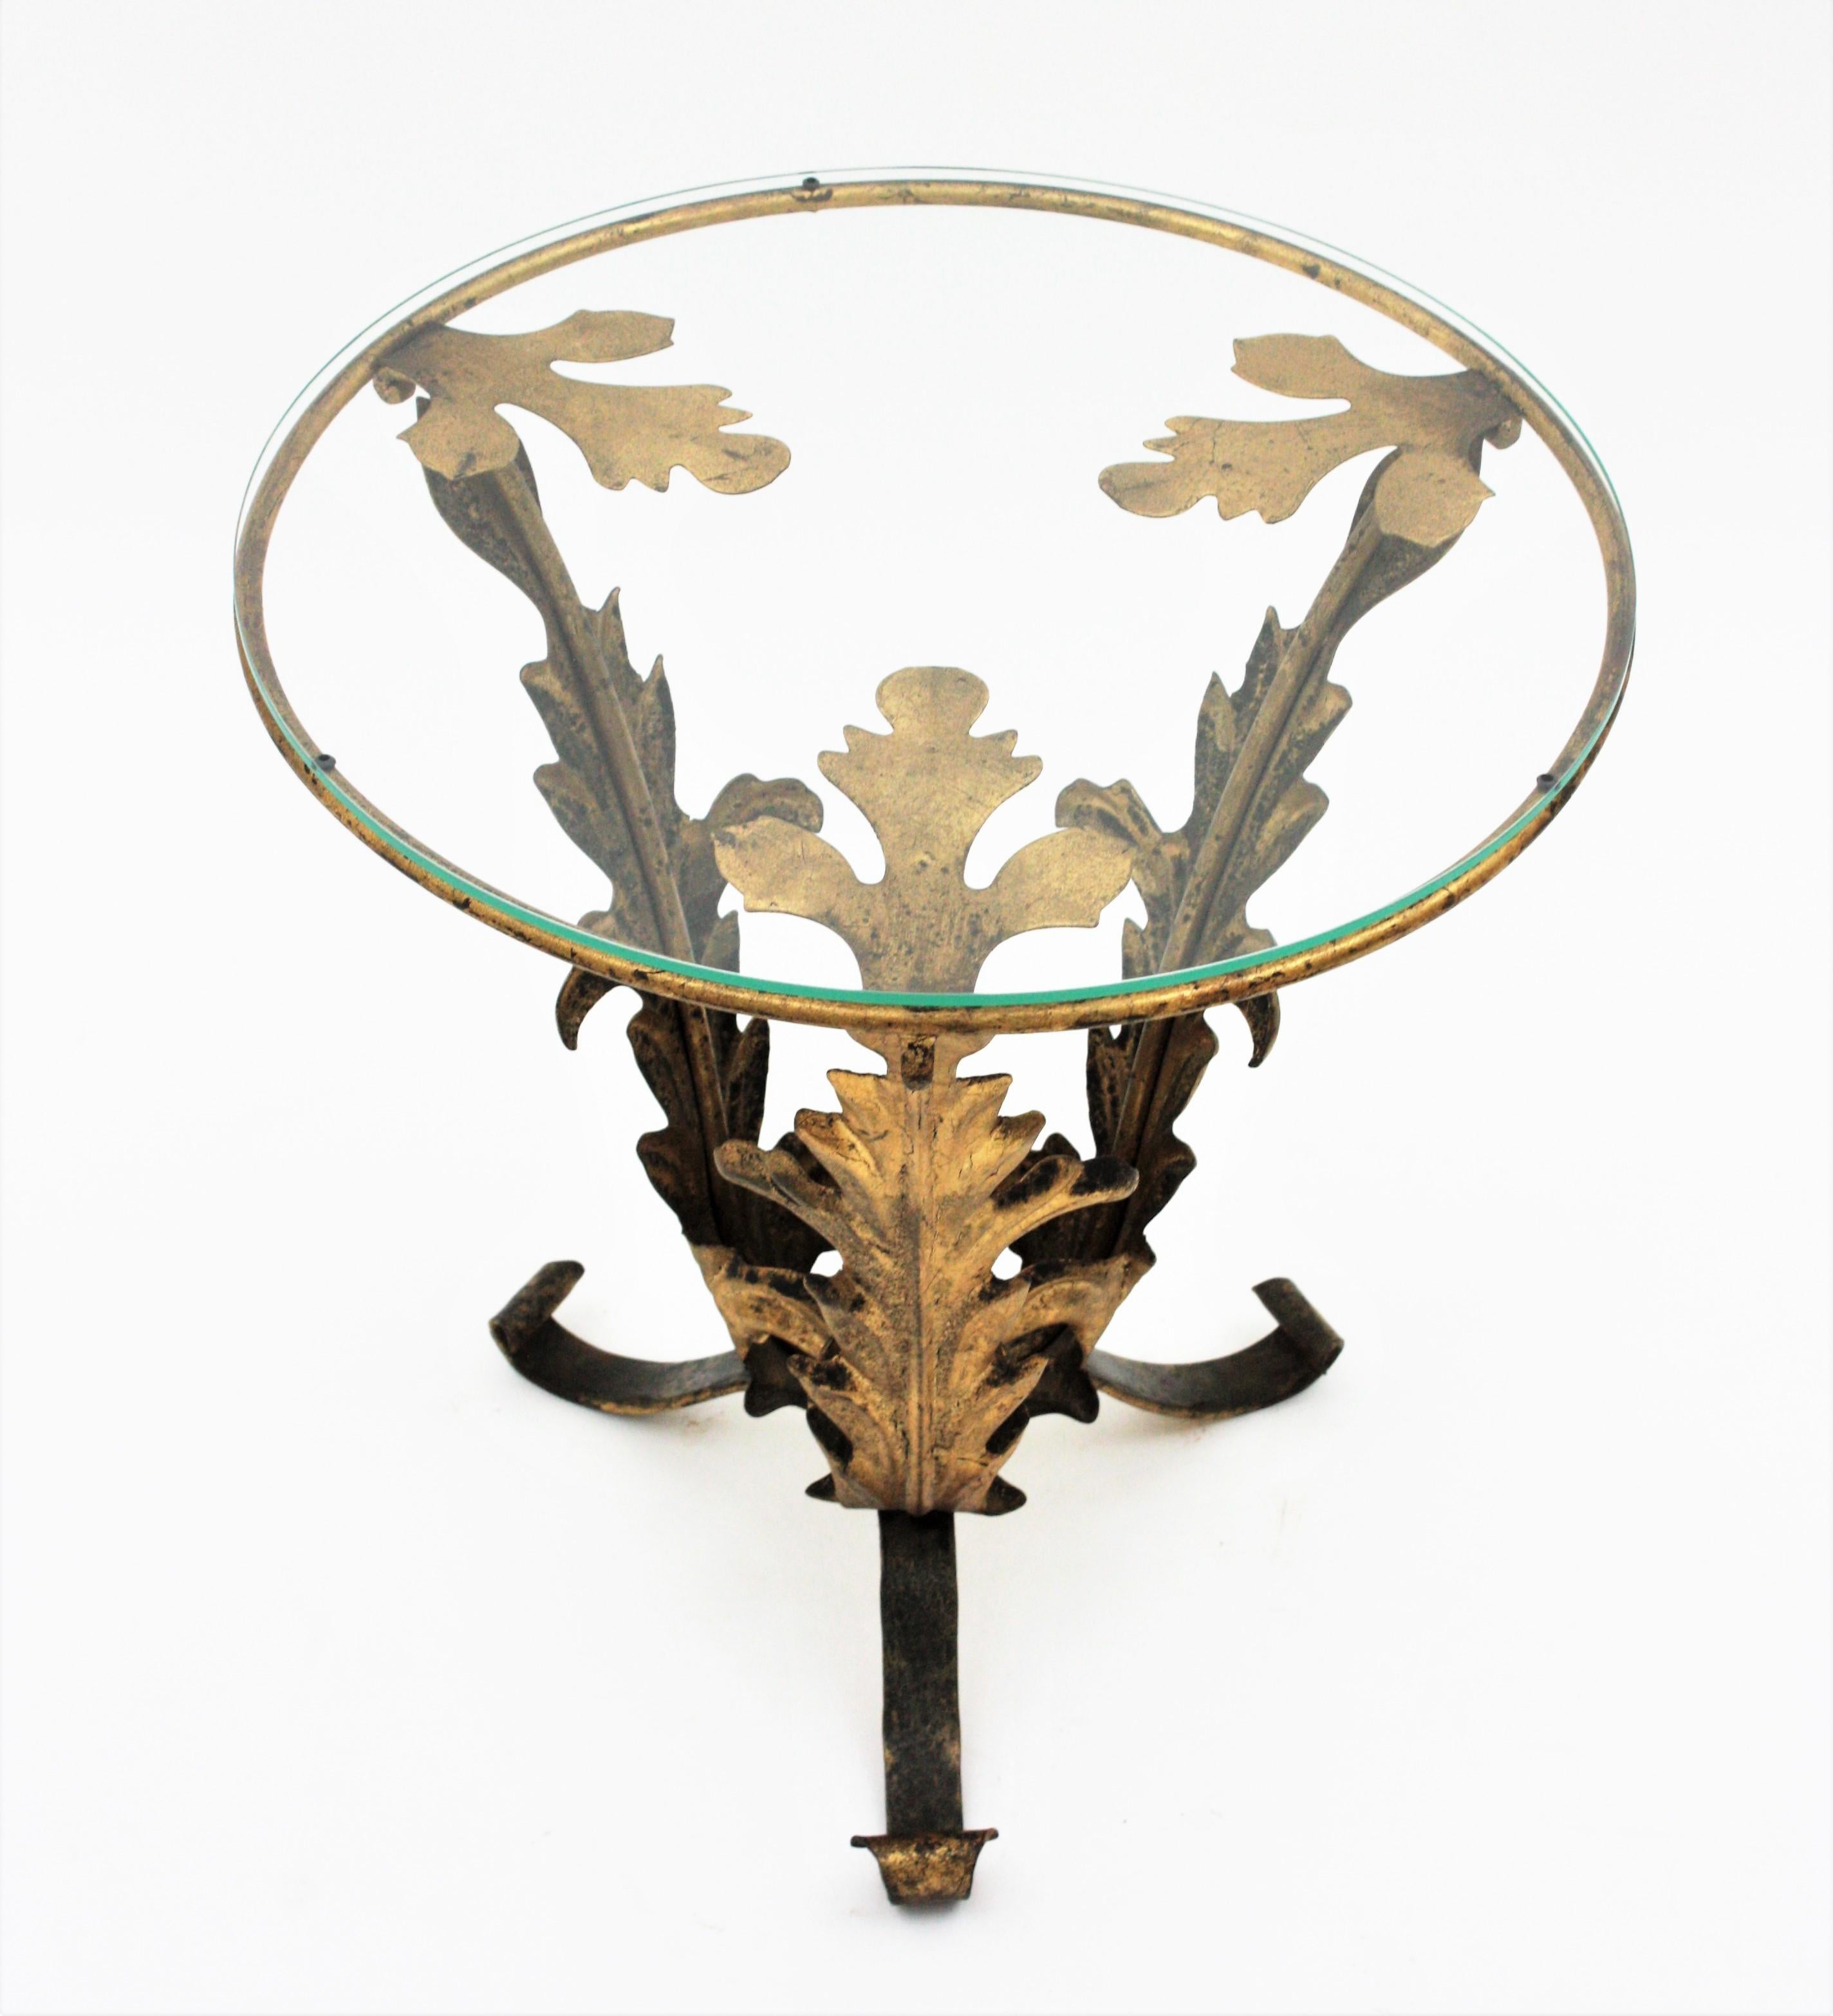 Hollywood Regency Foliage Drinks Table or Side Table in Gilt Iron, Spain, 1940s For Sale